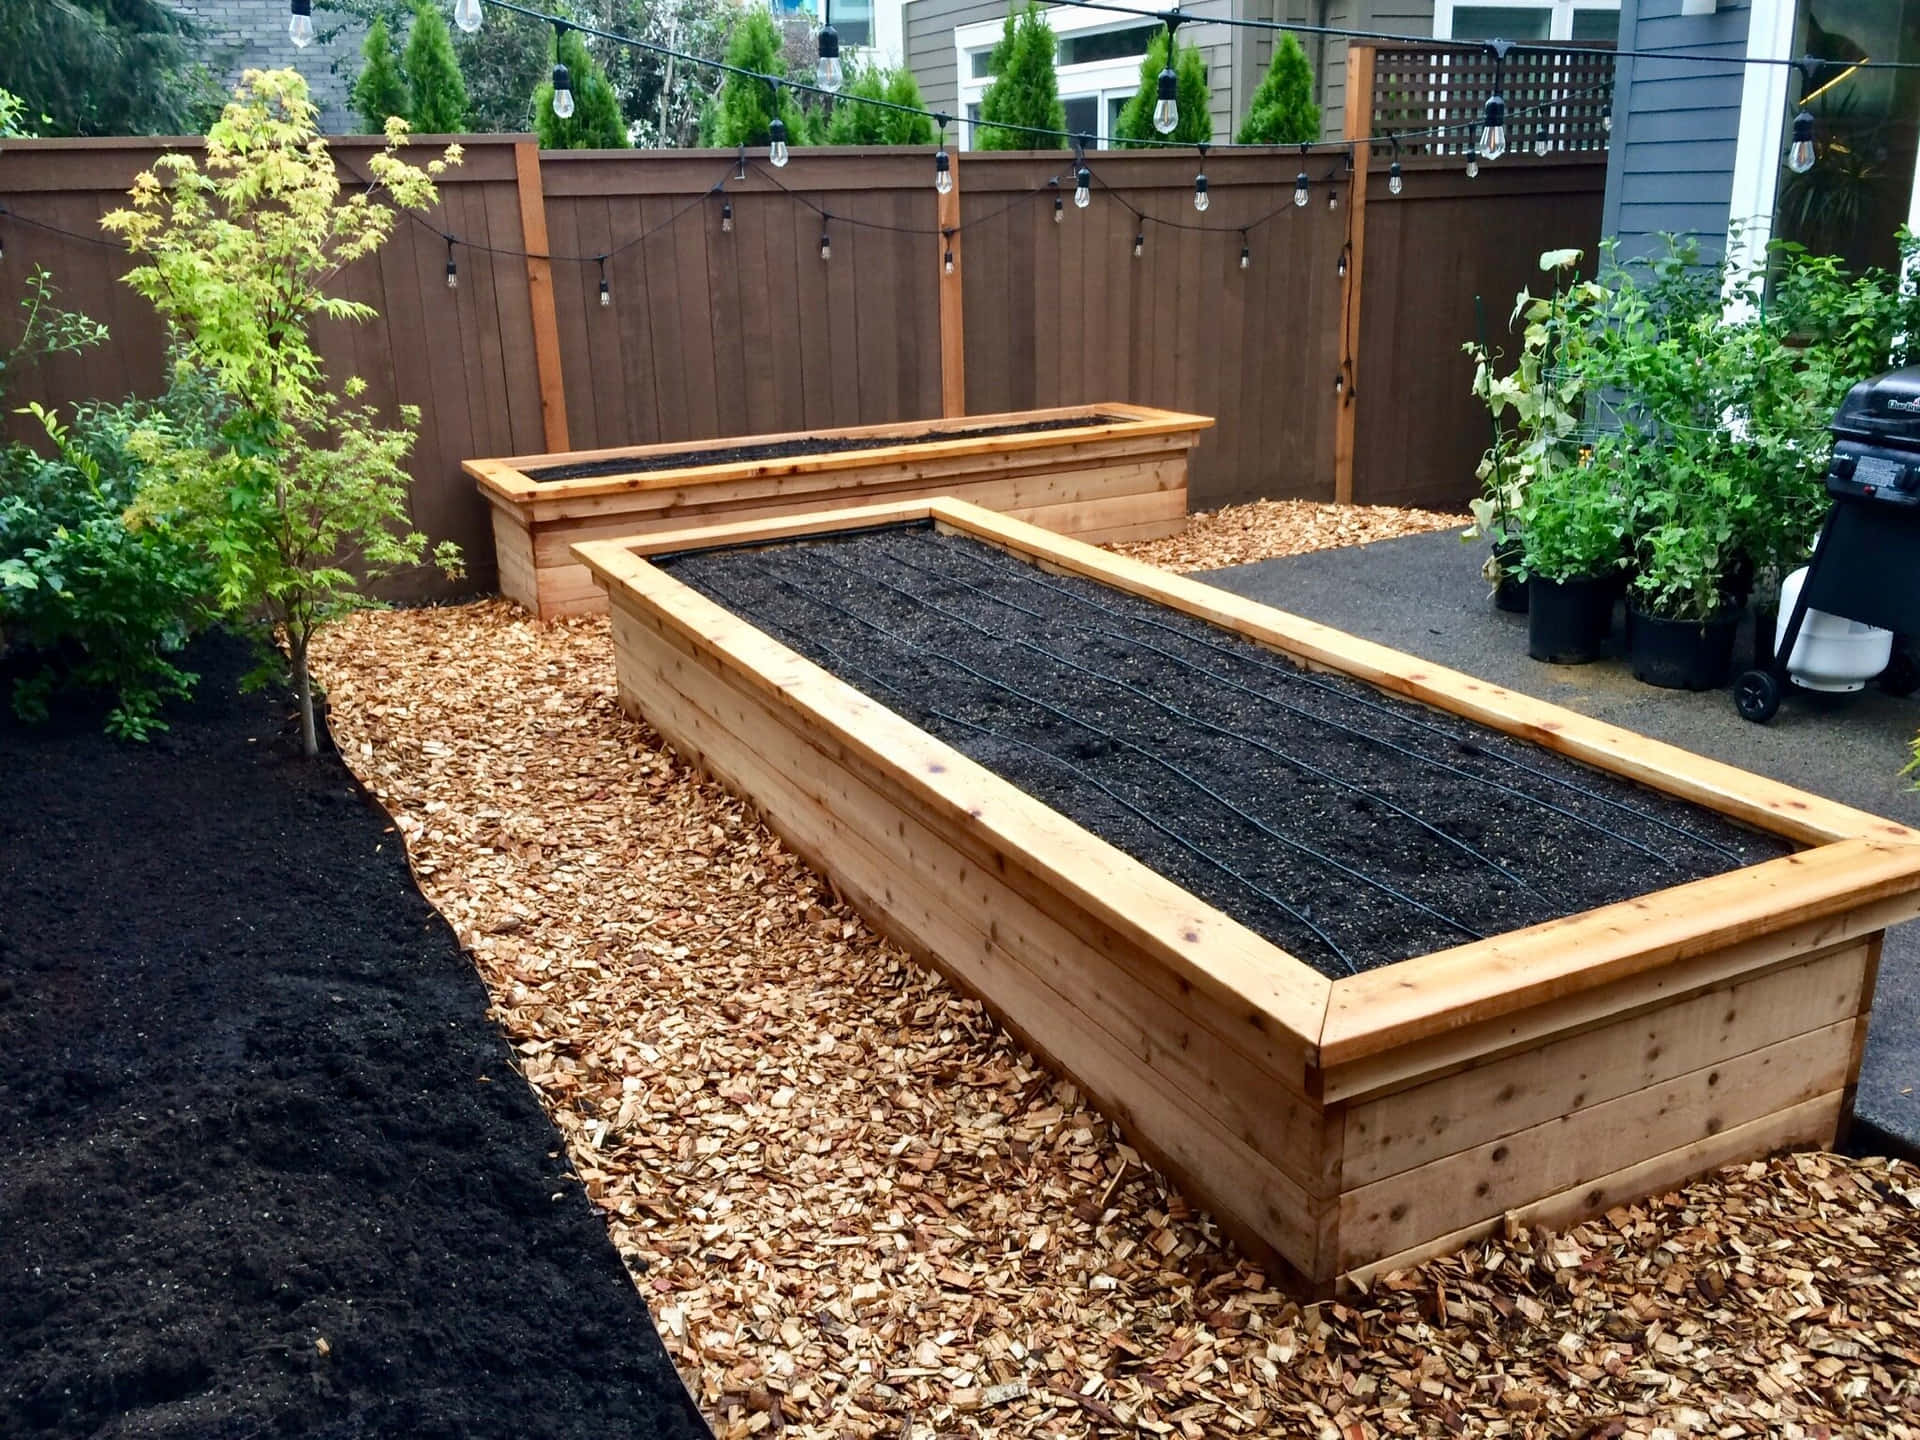 A beautifully landscaped garden bed to enjoy in the comfort of your own backyard Wallpaper